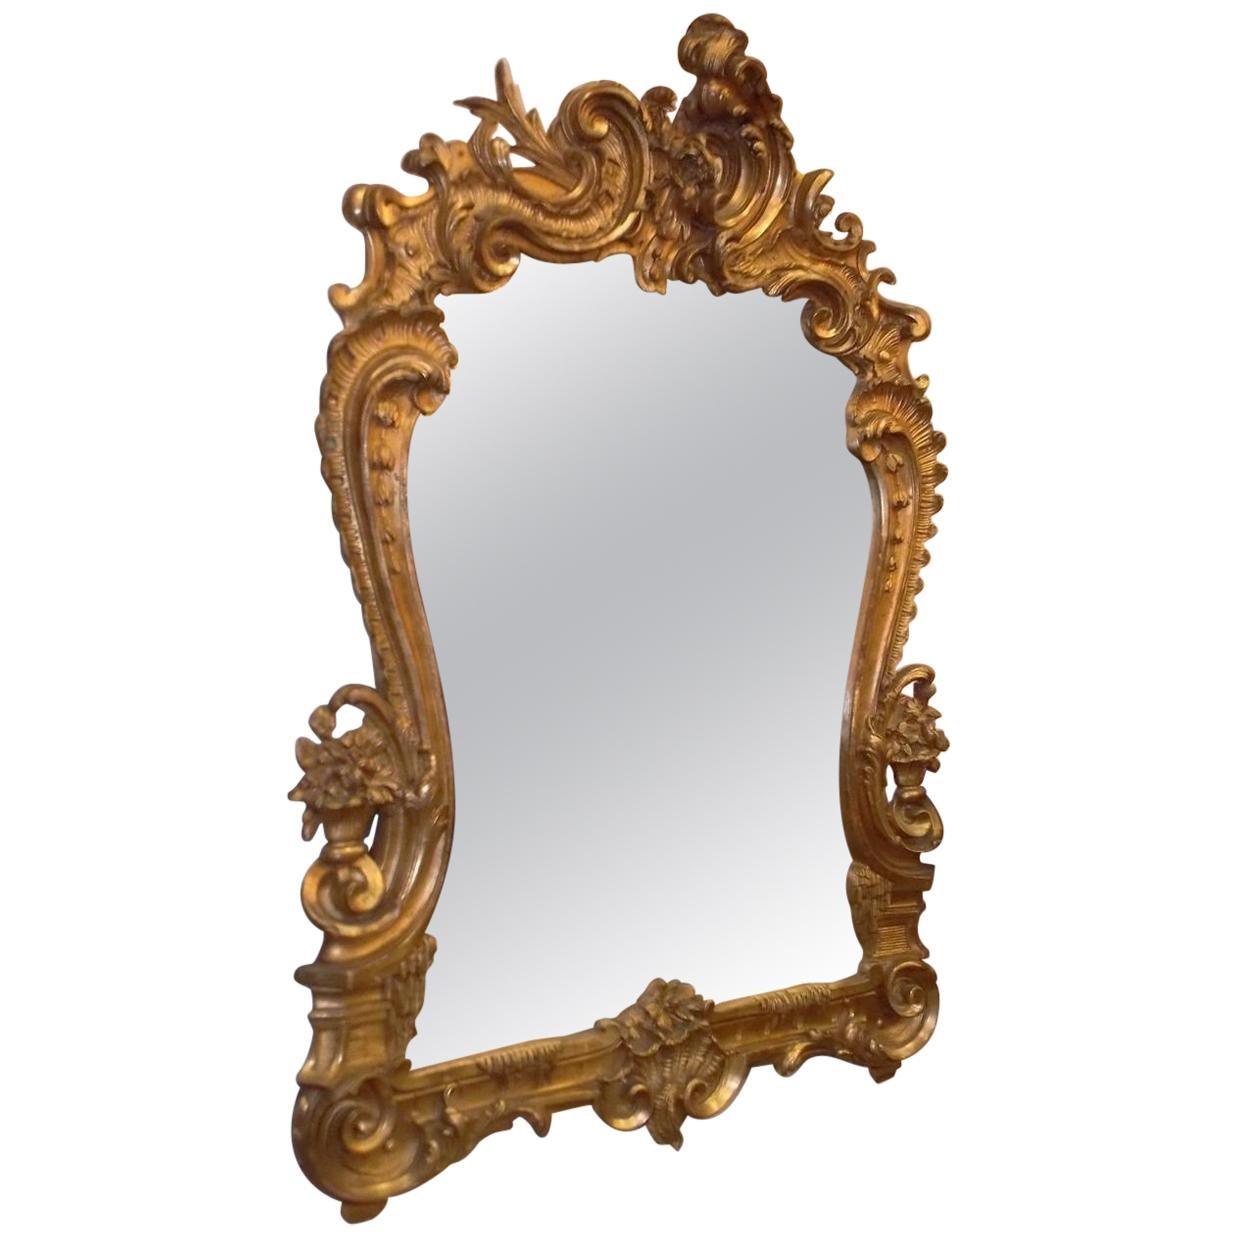 French Gilt Carved Wood Foilage and Beveled Decorative Wall Mirror, Circa 1820